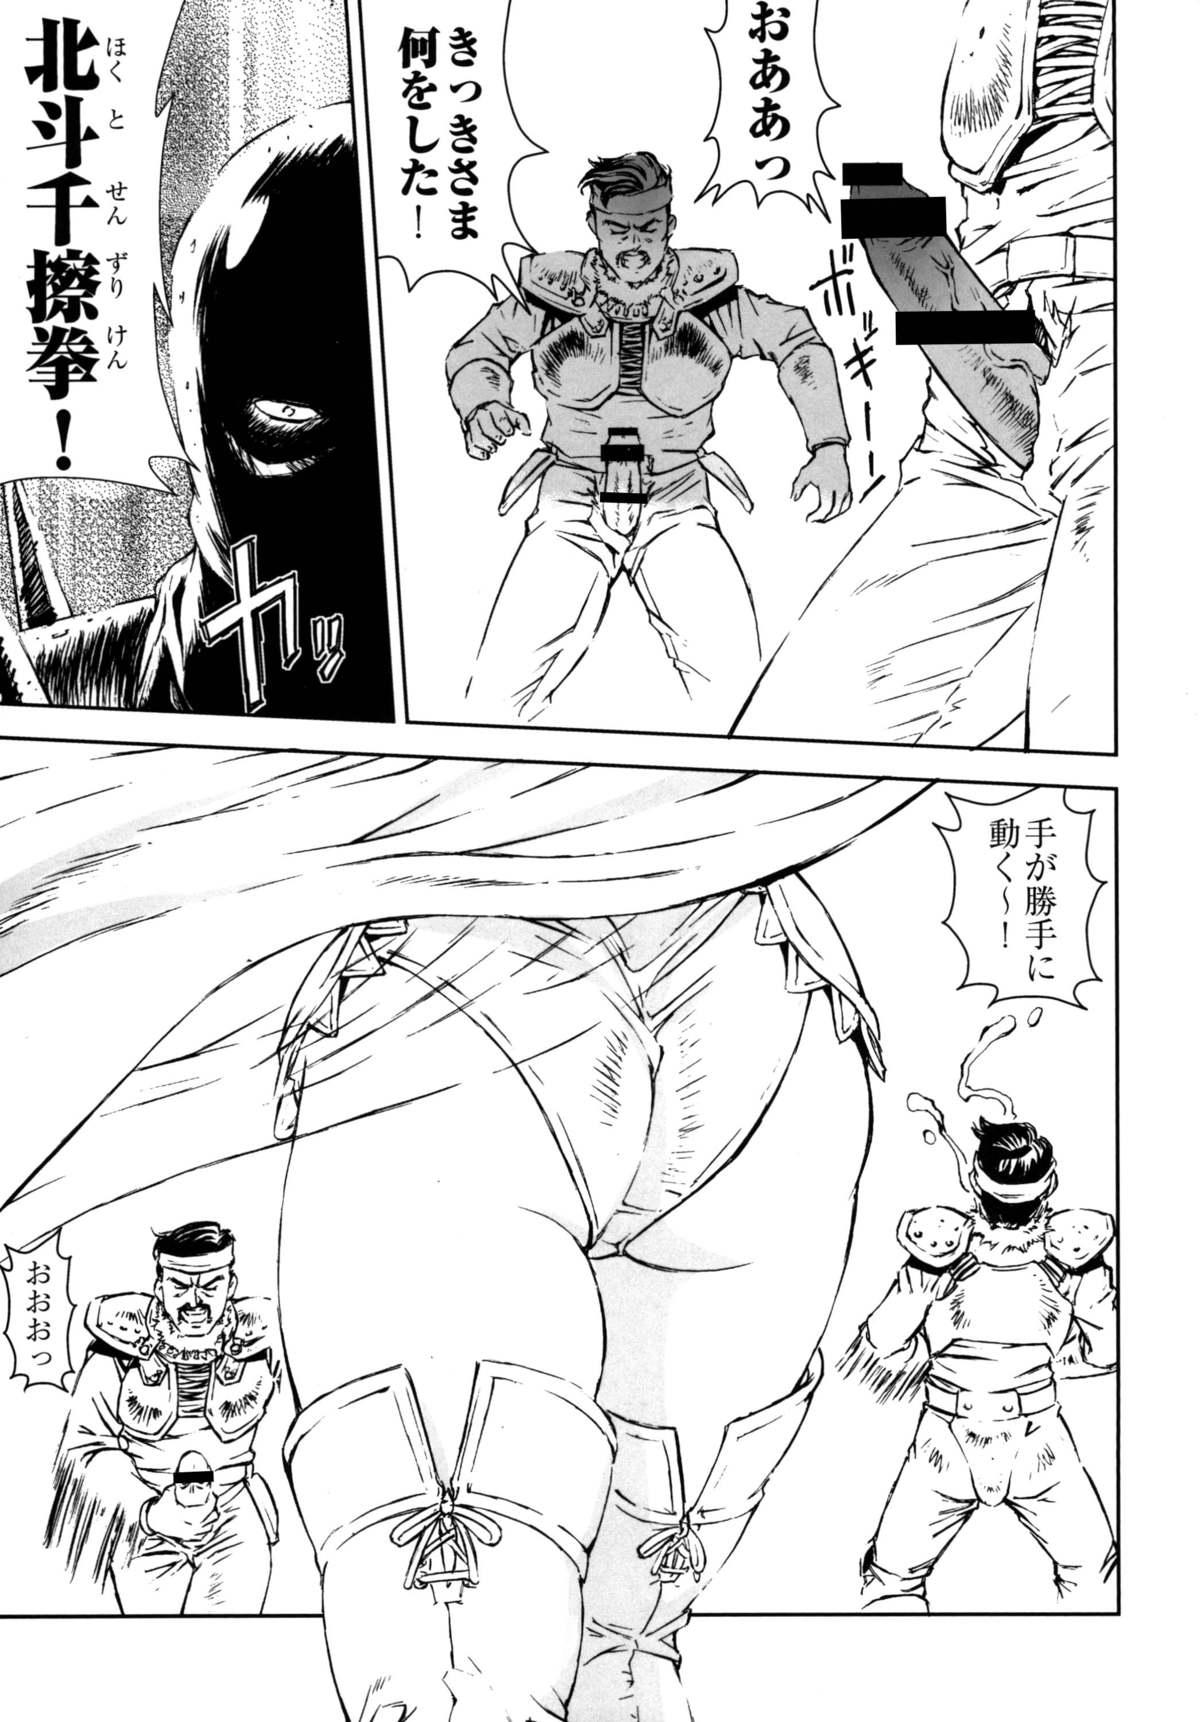 Exhib HOT BITCH JUMP 2 - Kochikame Fist of the north star Blowjobs - Page 6